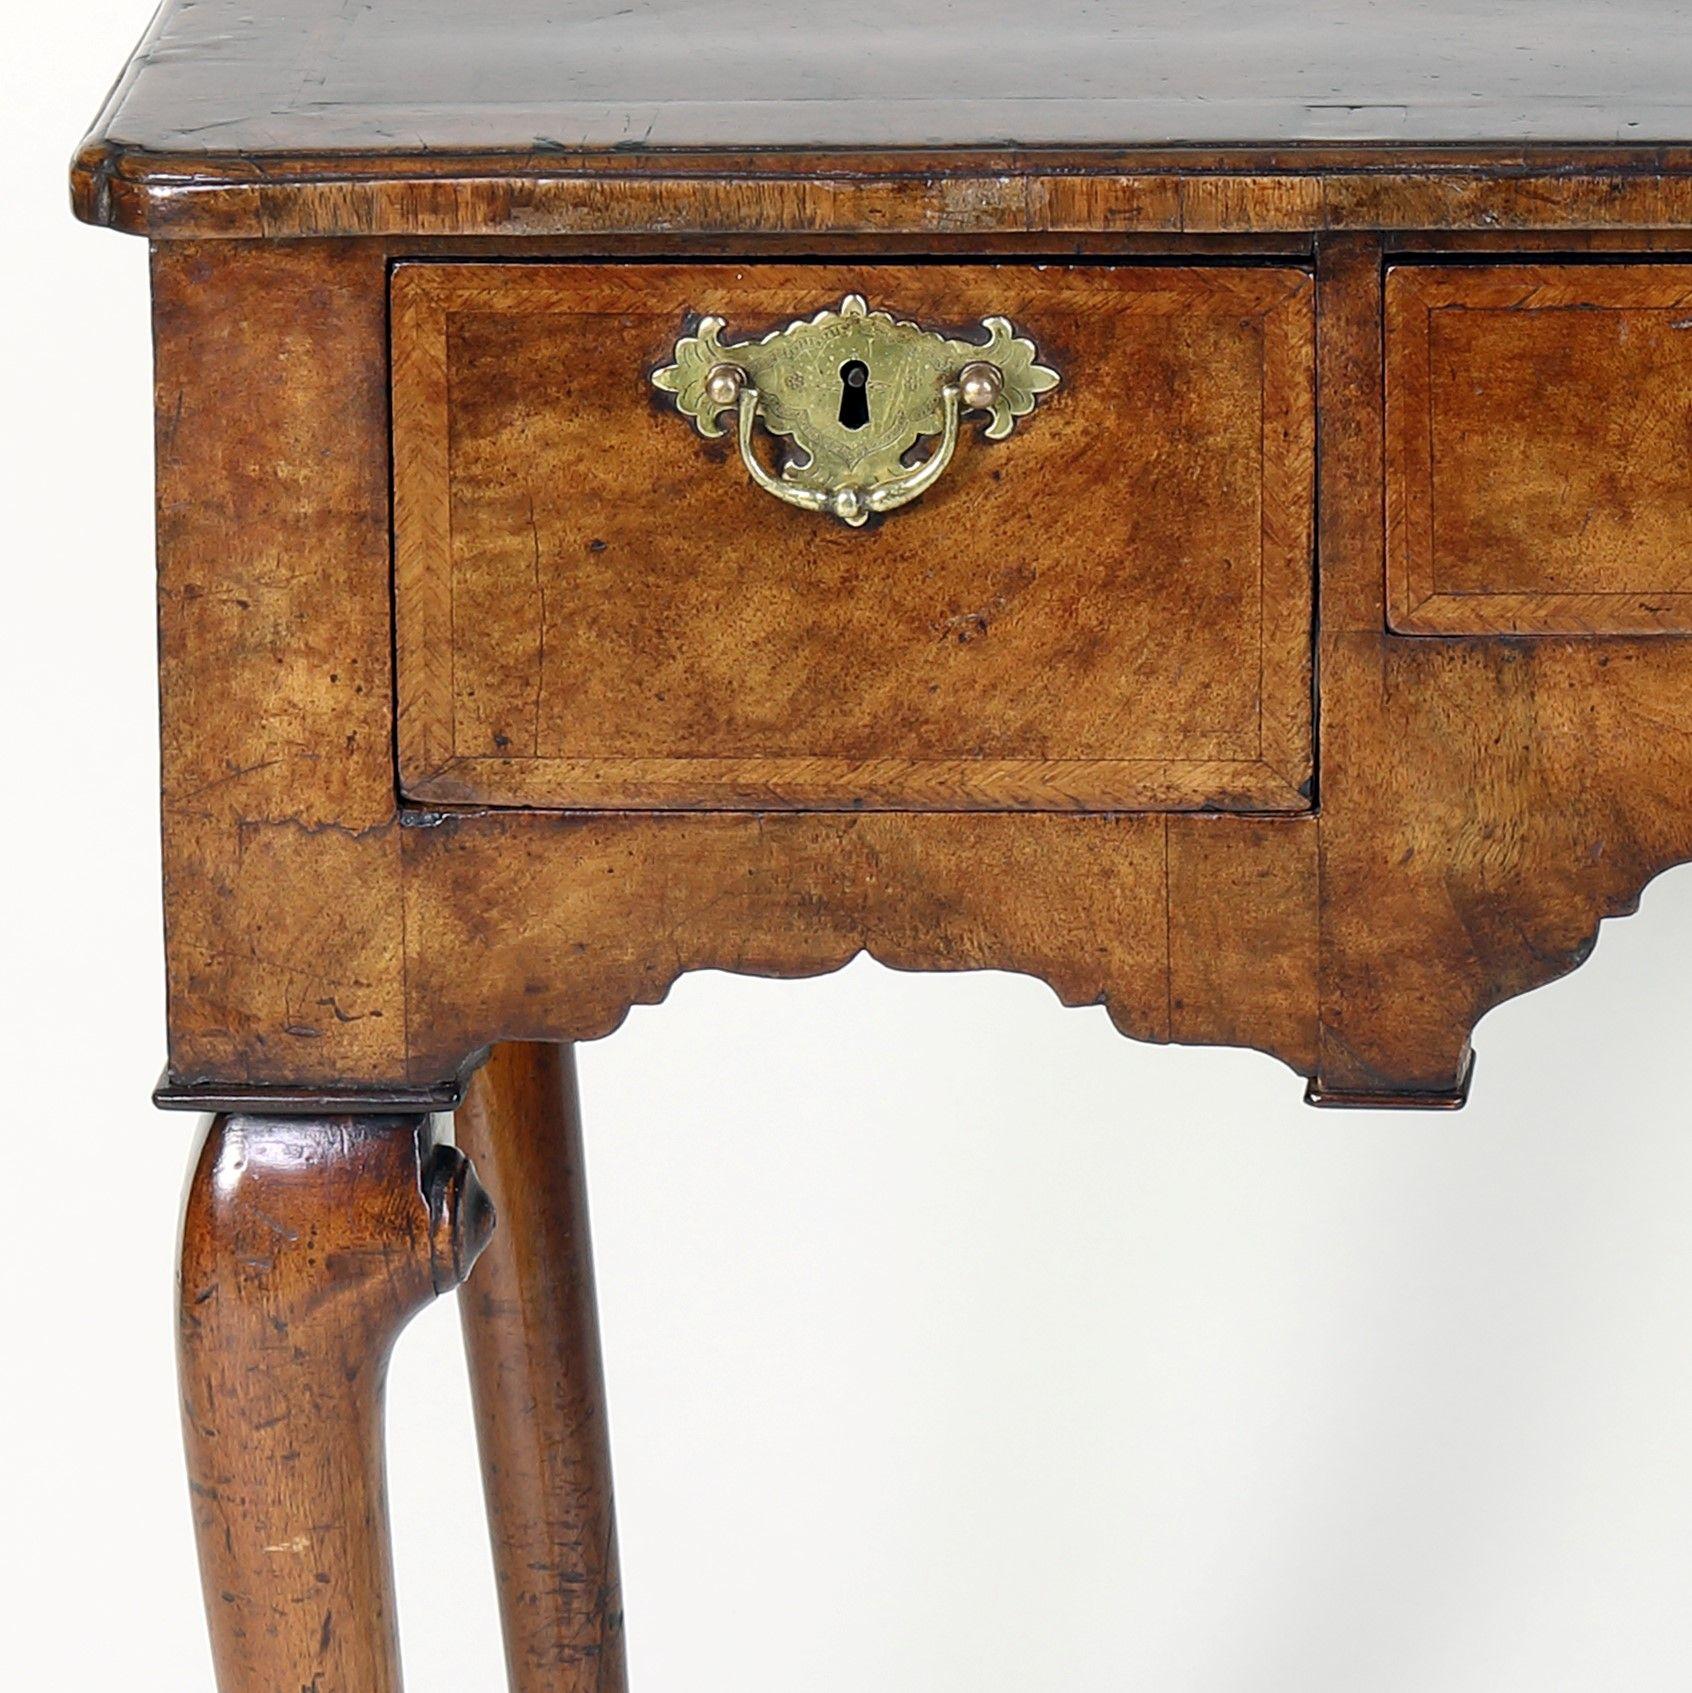 A fine quality George I period Walnut lowboy of wonderful colour and rich patination with cross-banded and herringbone inlaid quartered top having re-entrant corners all round, above an arrangement of three drawers, similarly decorated, and a shaped